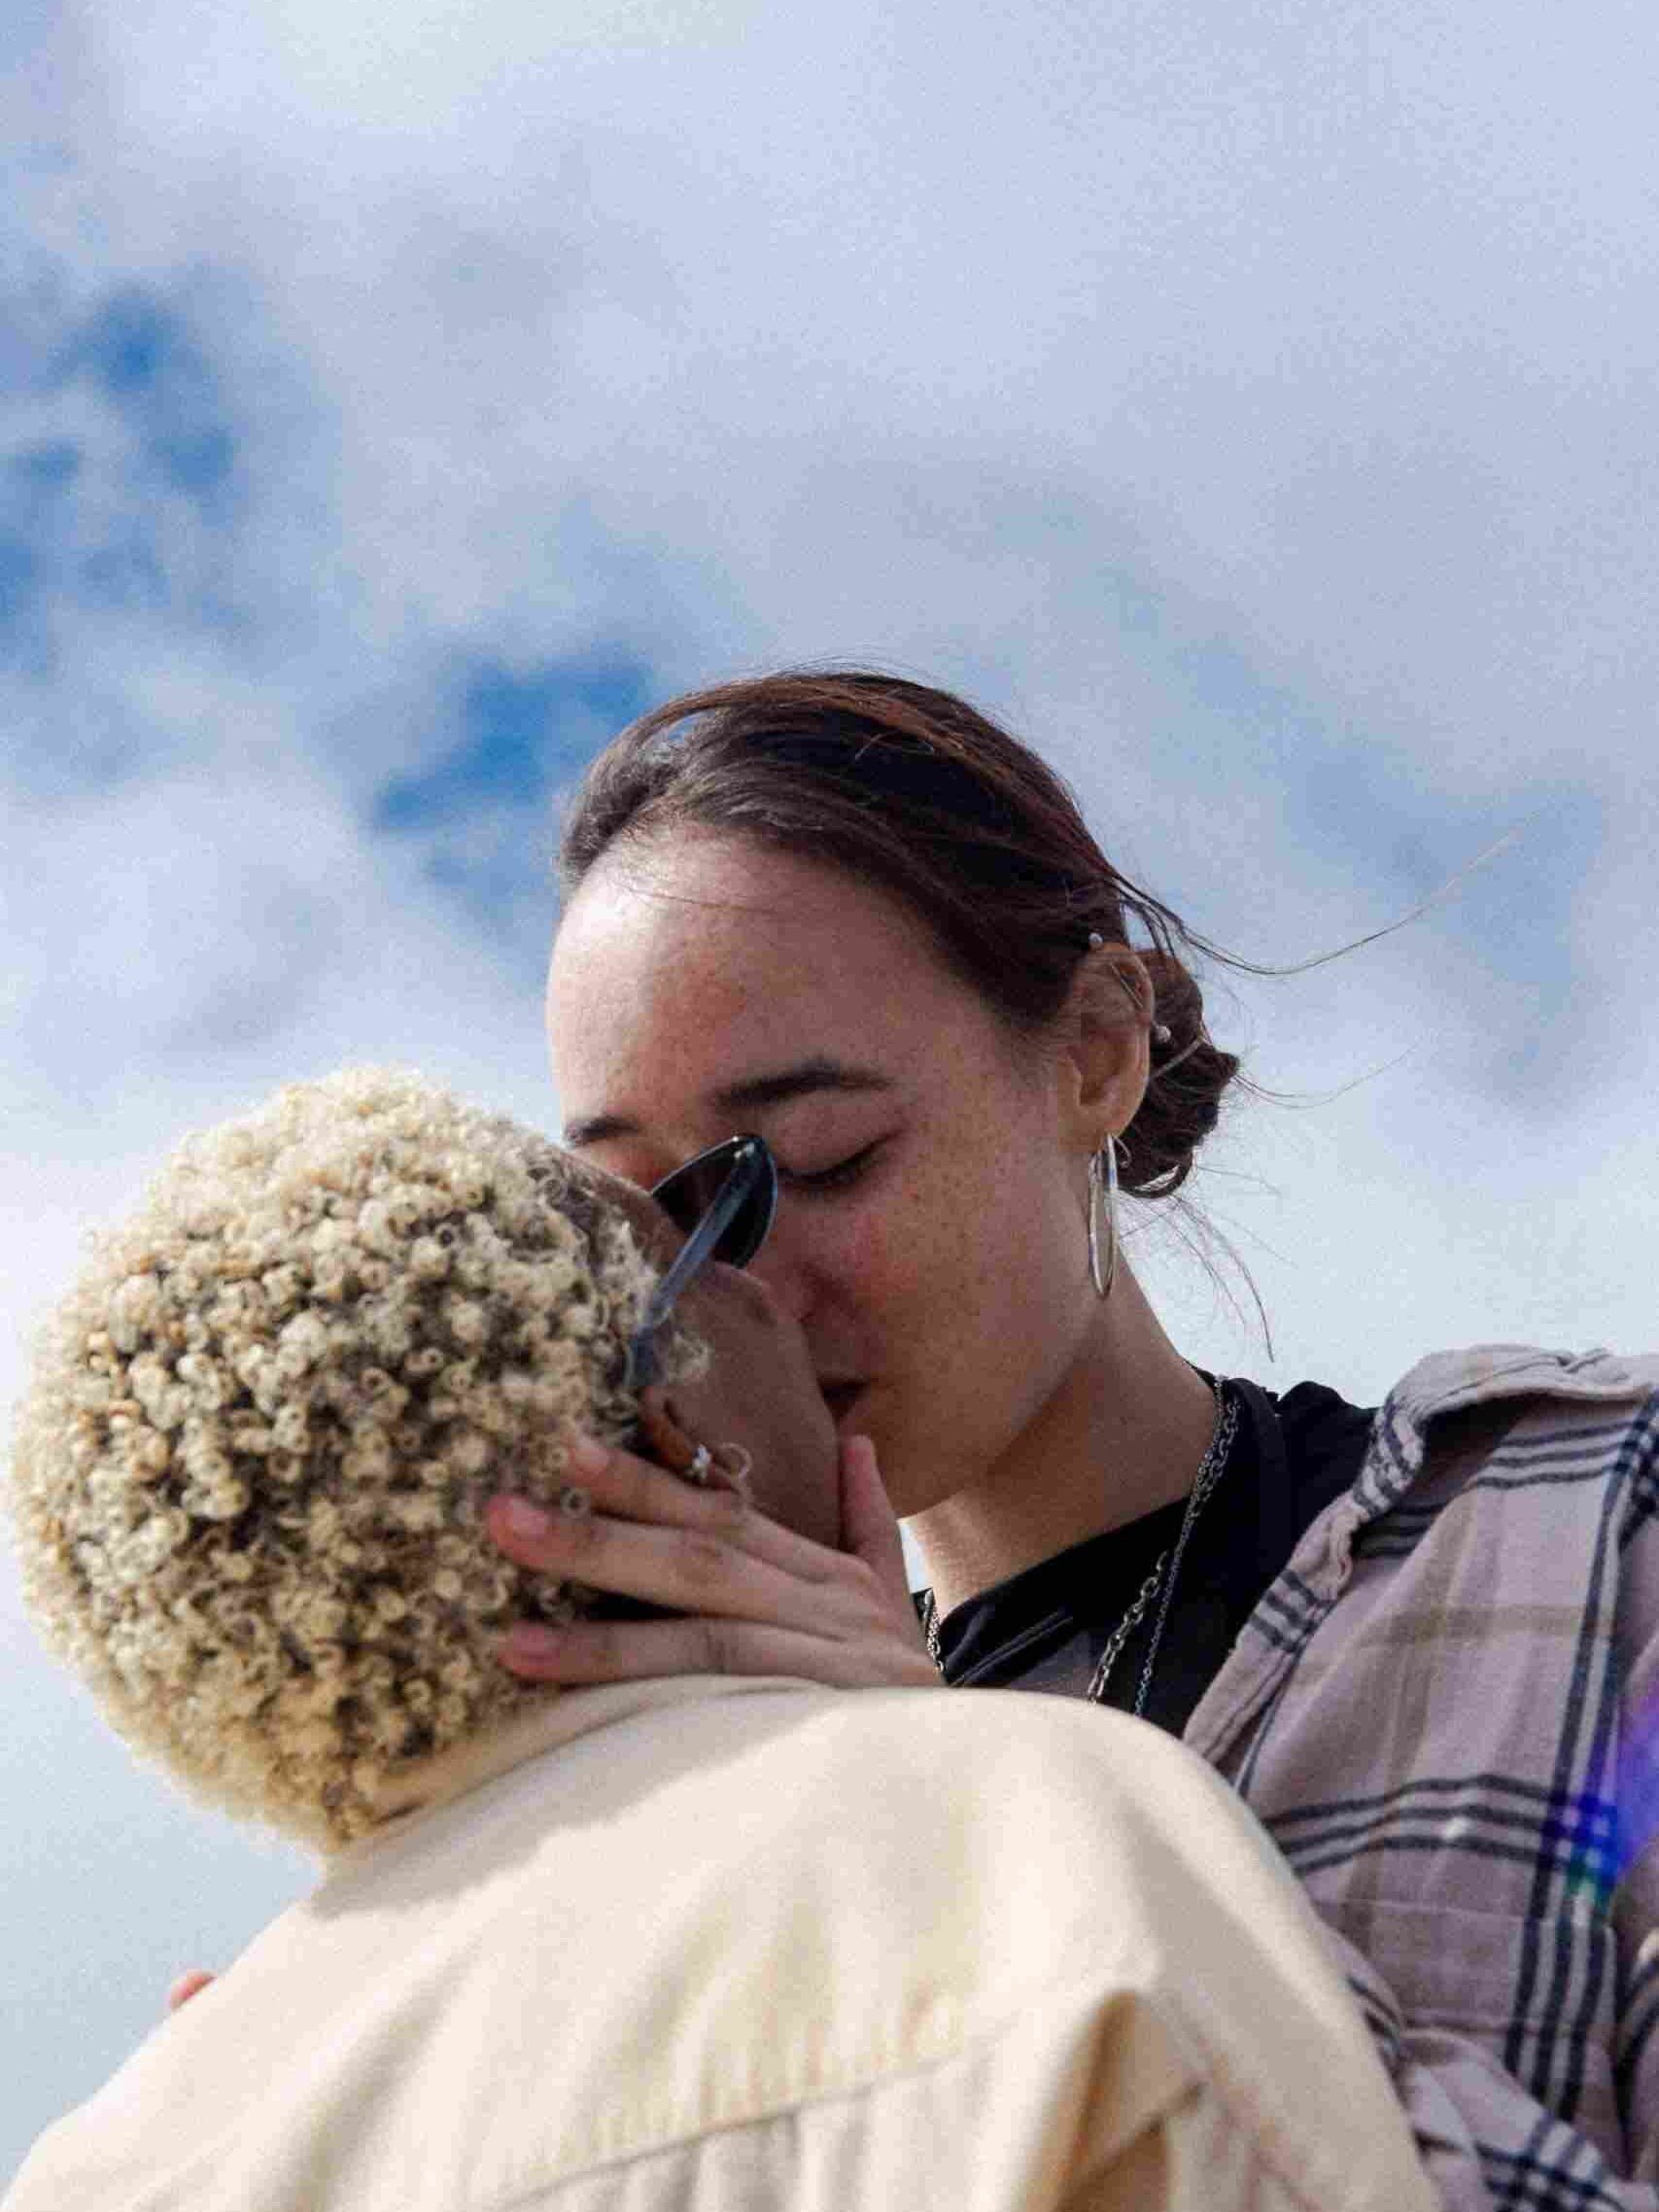 two people kissing